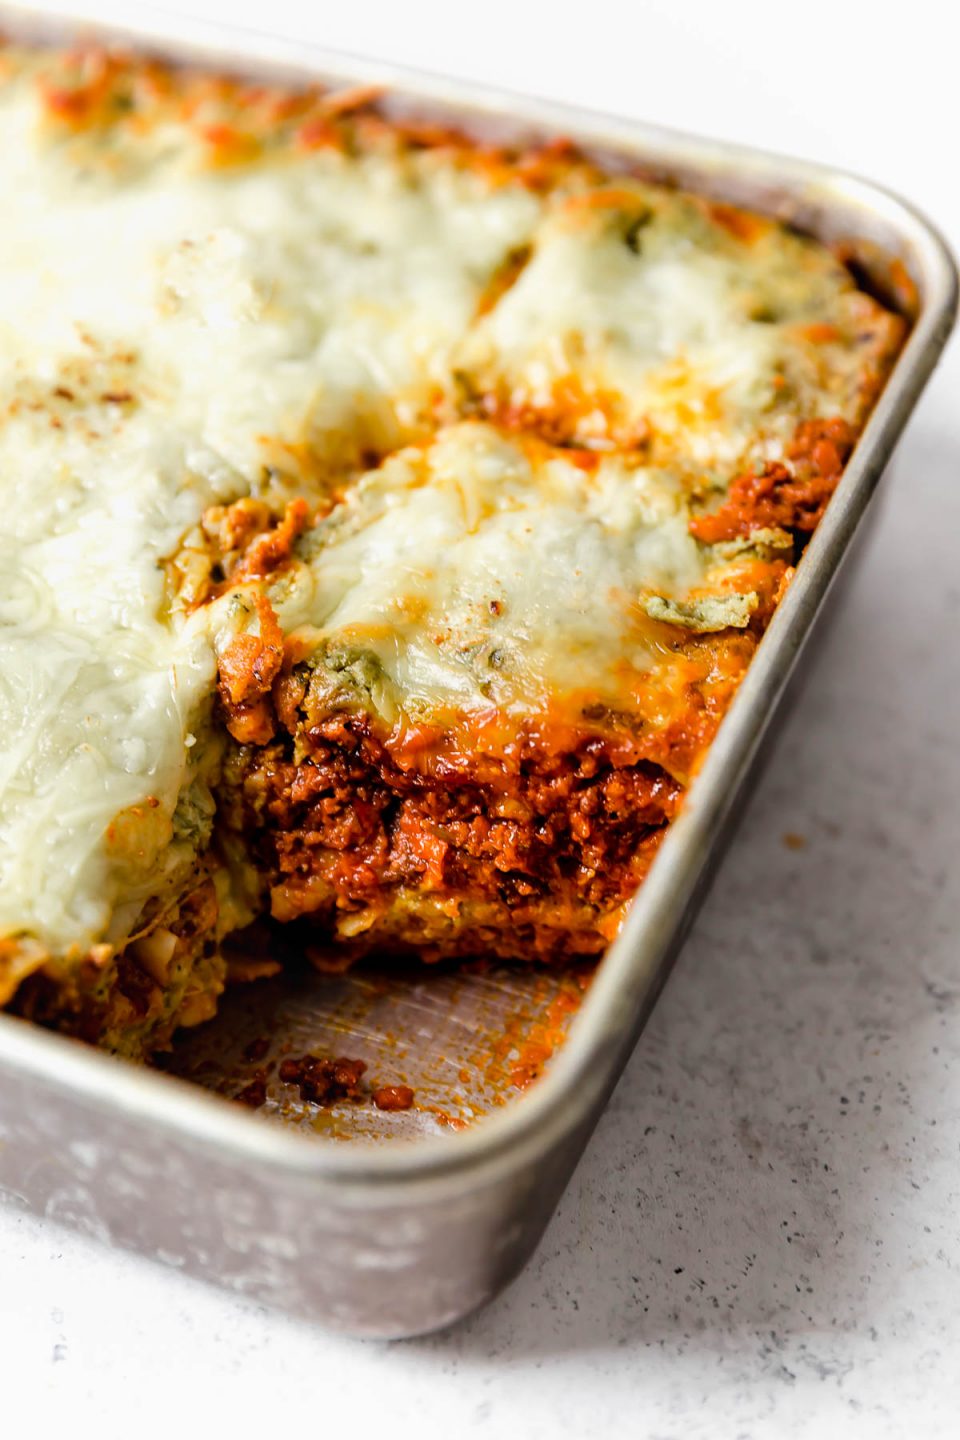 Christmas Eve Lasagna in a baking dish, showing the layers of bolognese sauce, pesto, pasta & cheese.